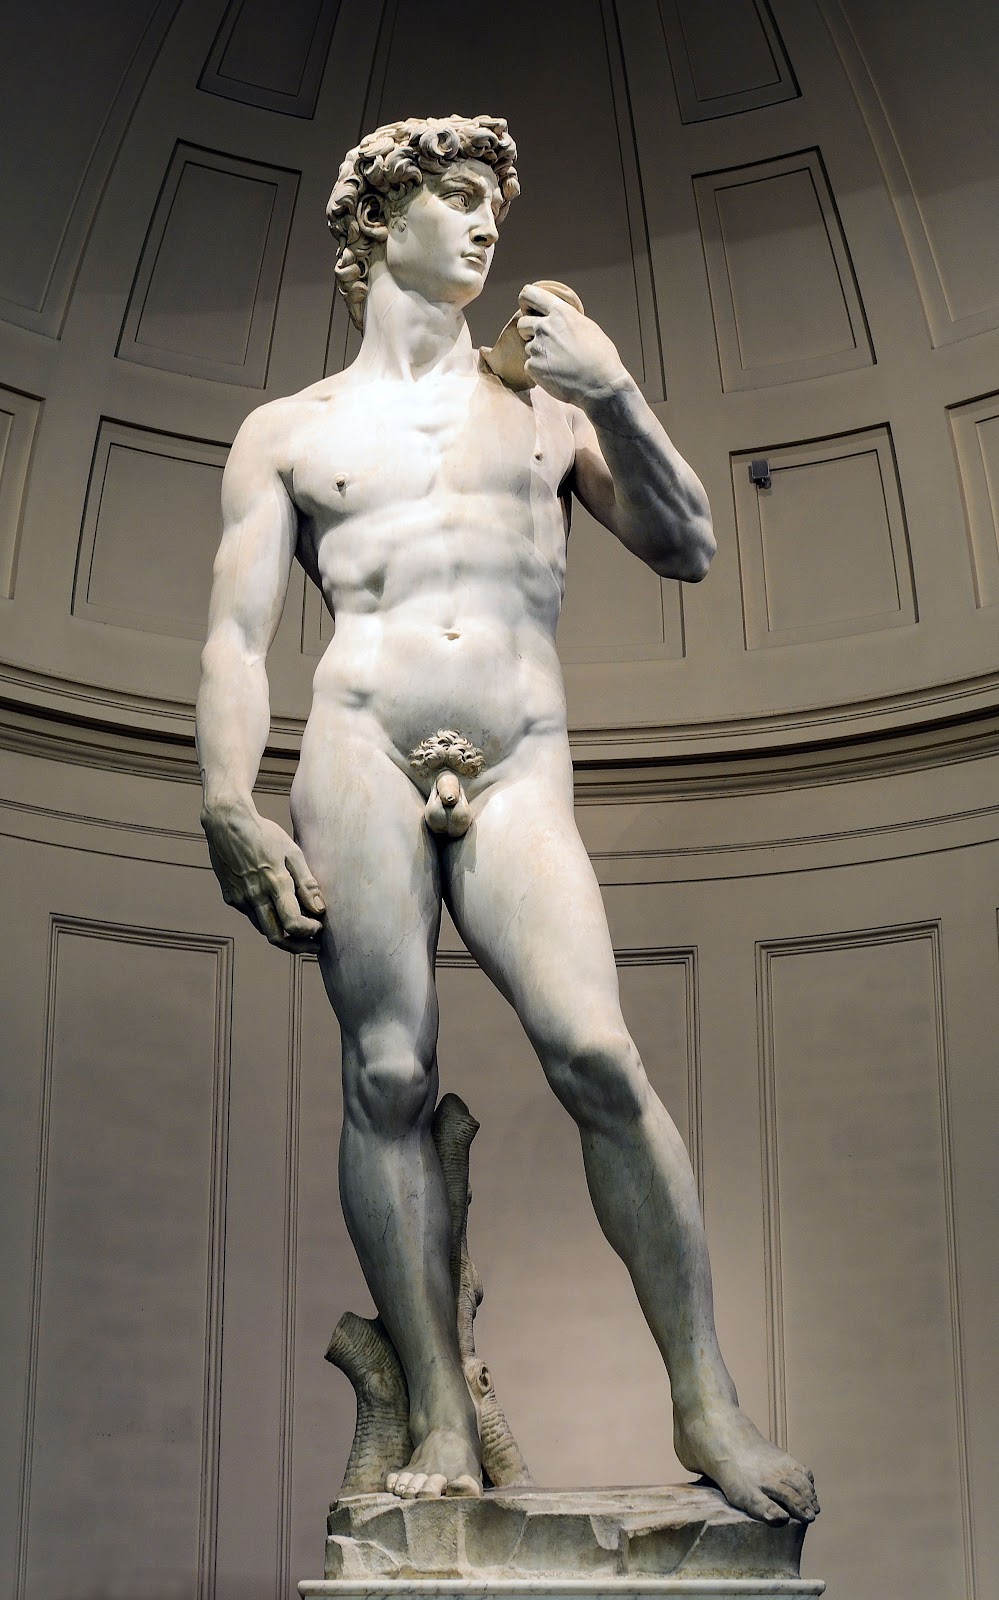 Michelangelo's The David, a towering marble sculpture of a nude David before his battle with Goliath.